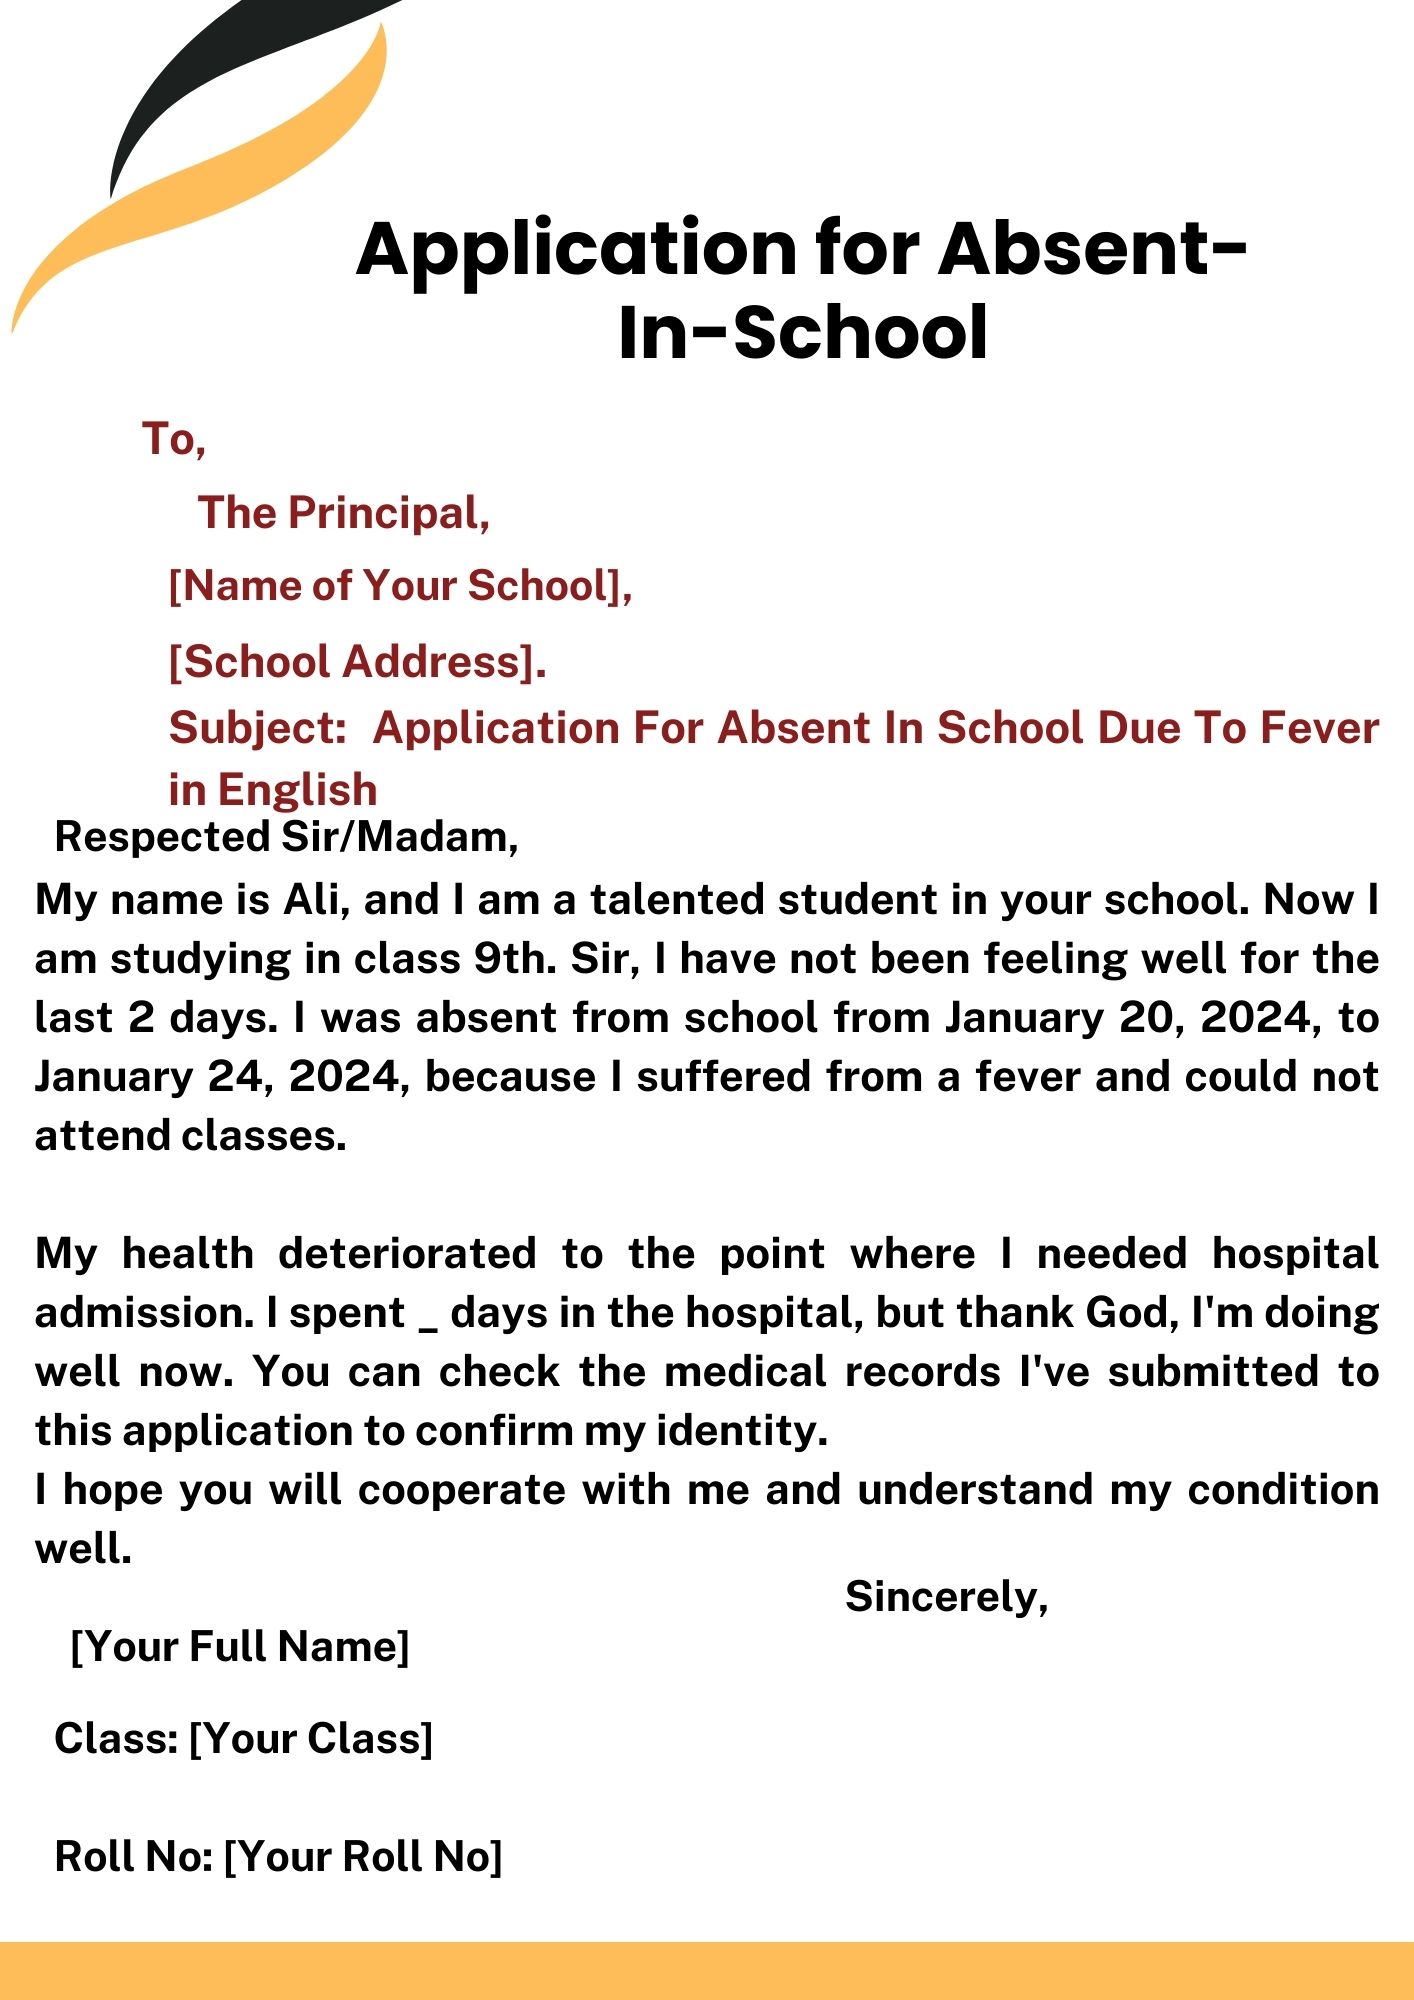   Application For Absent In School Due To Fever In English